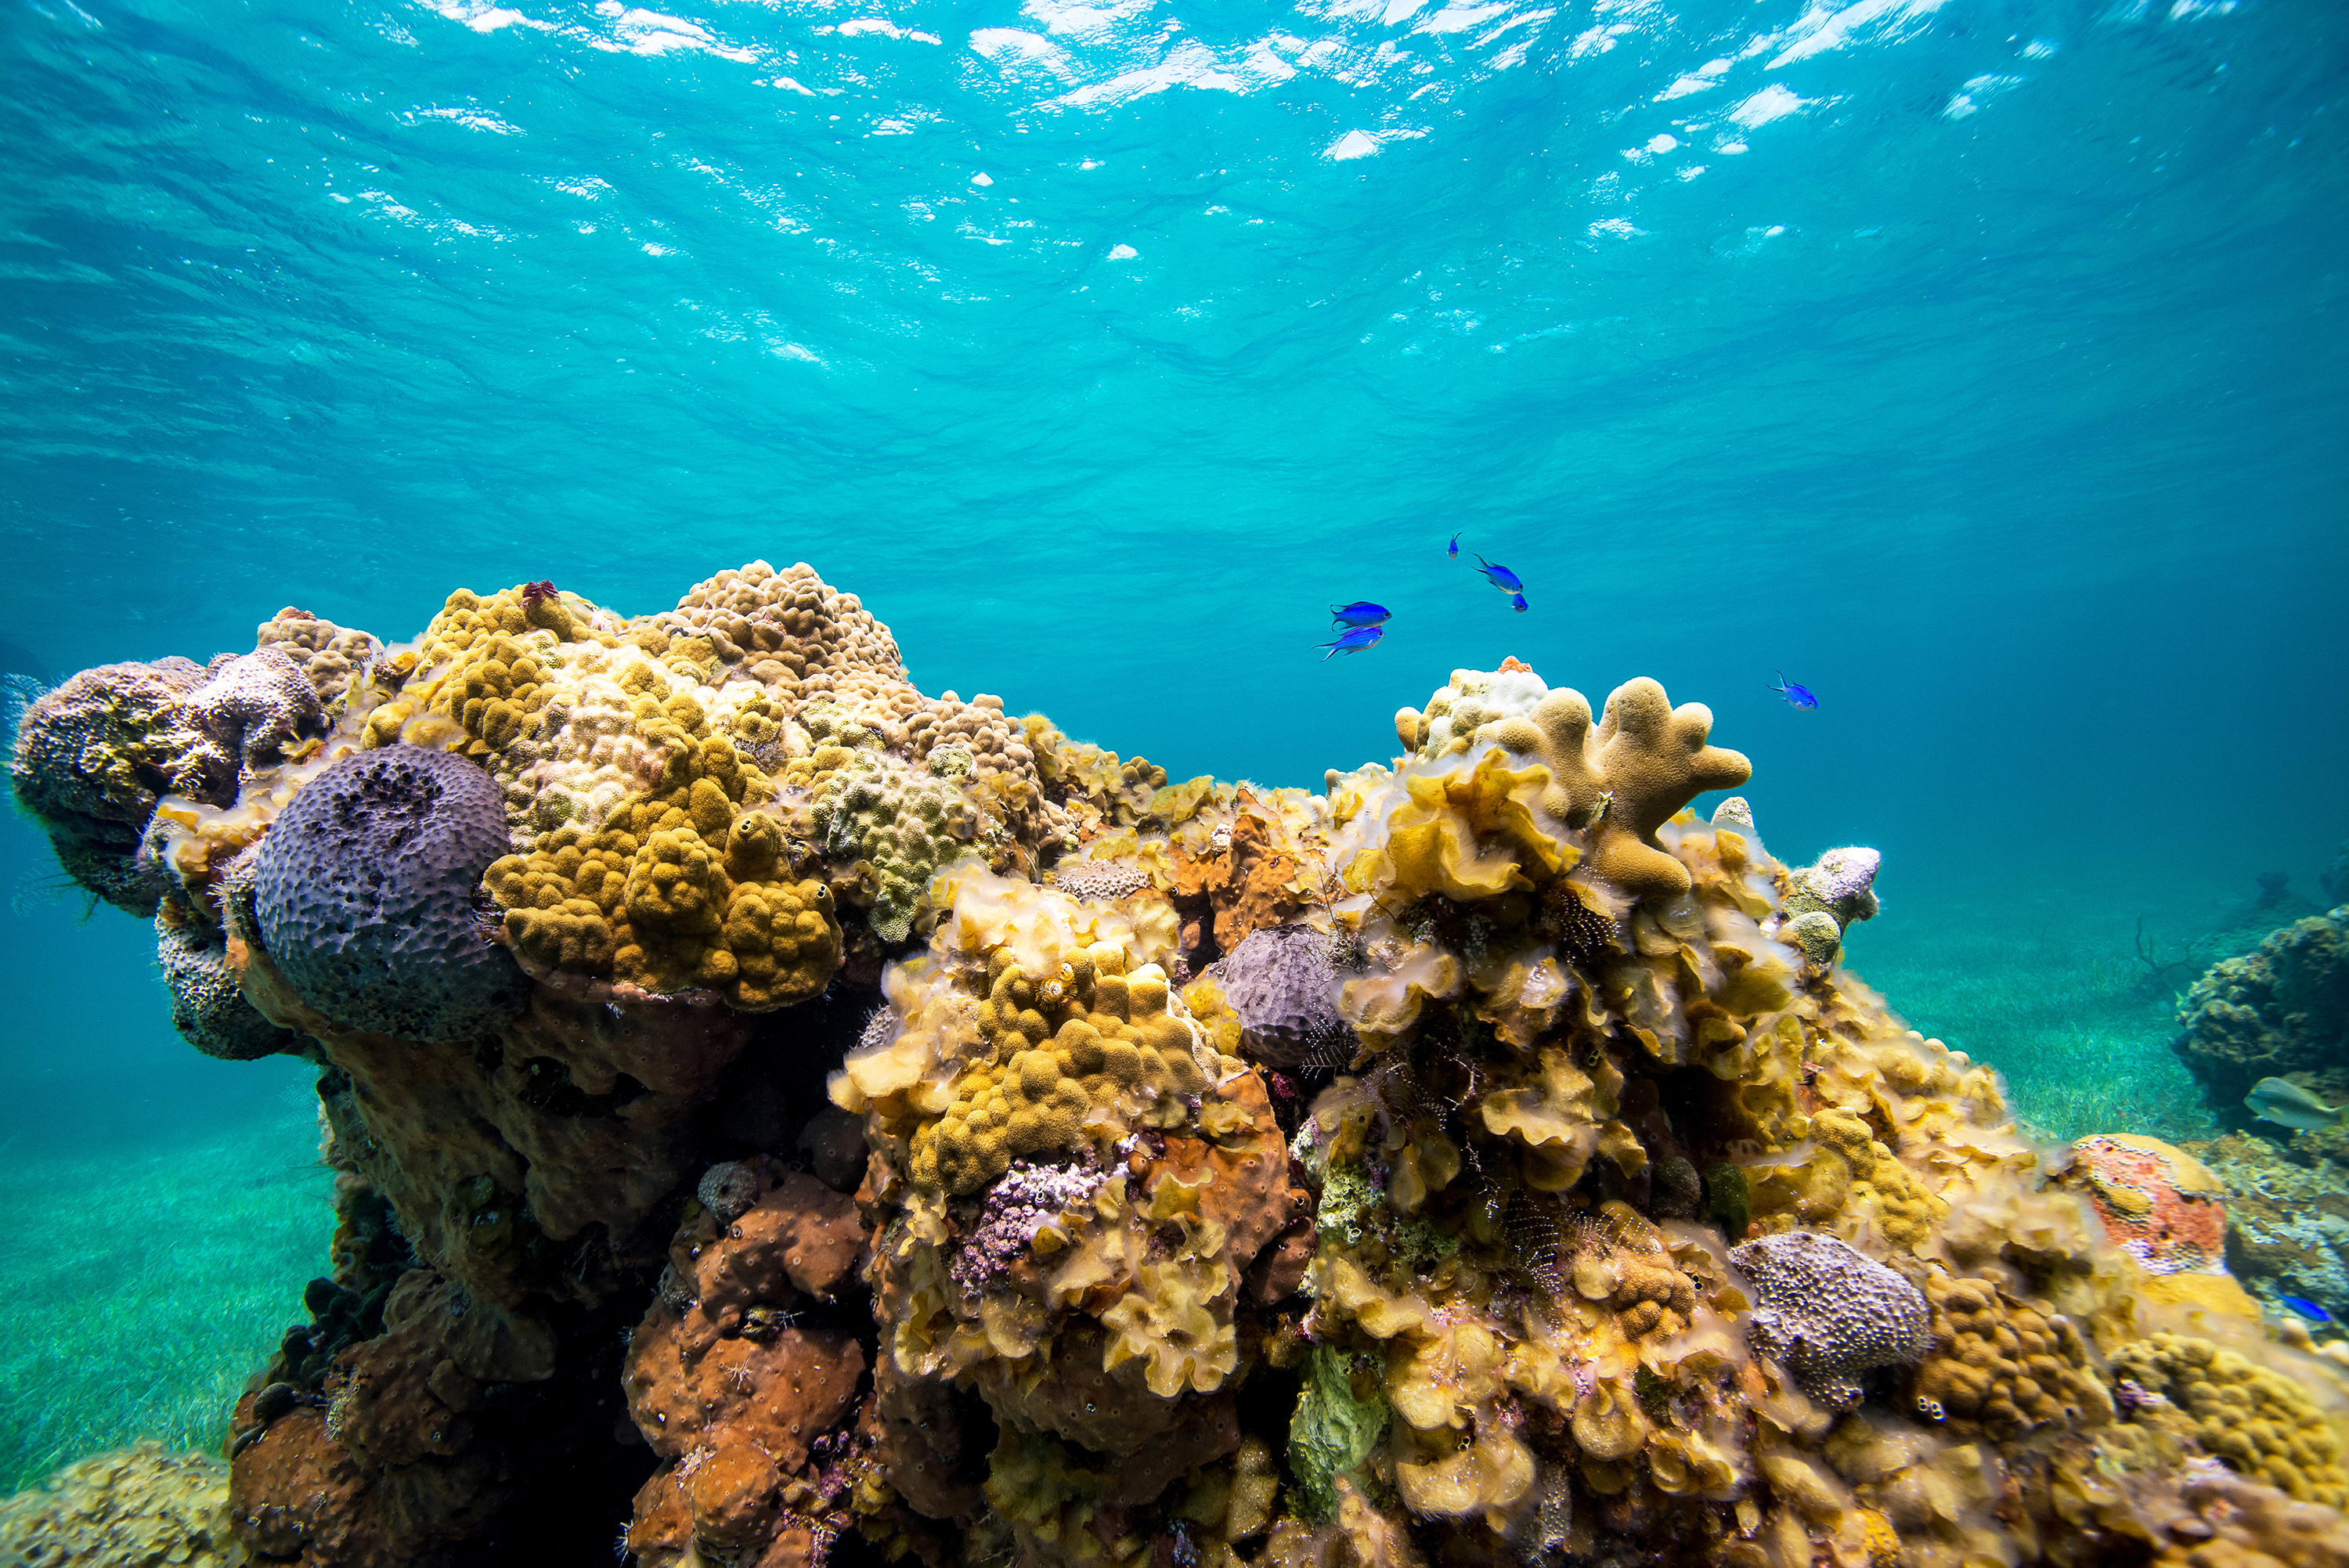 Healthy coral reefs in the Caribbean water.